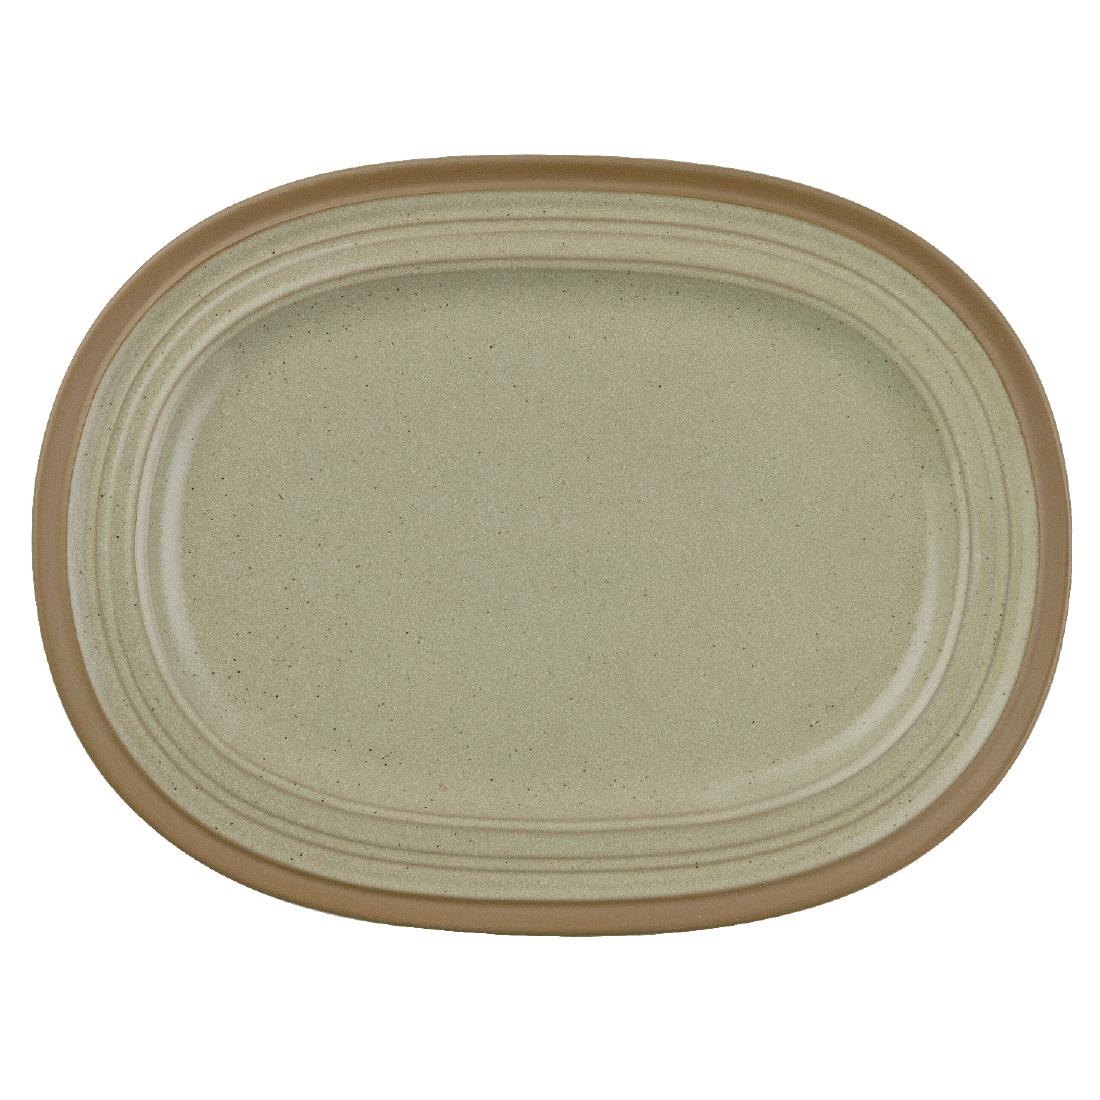 Churchill Igneous Stoneware Oval Plates 320mm (Pack of 6)